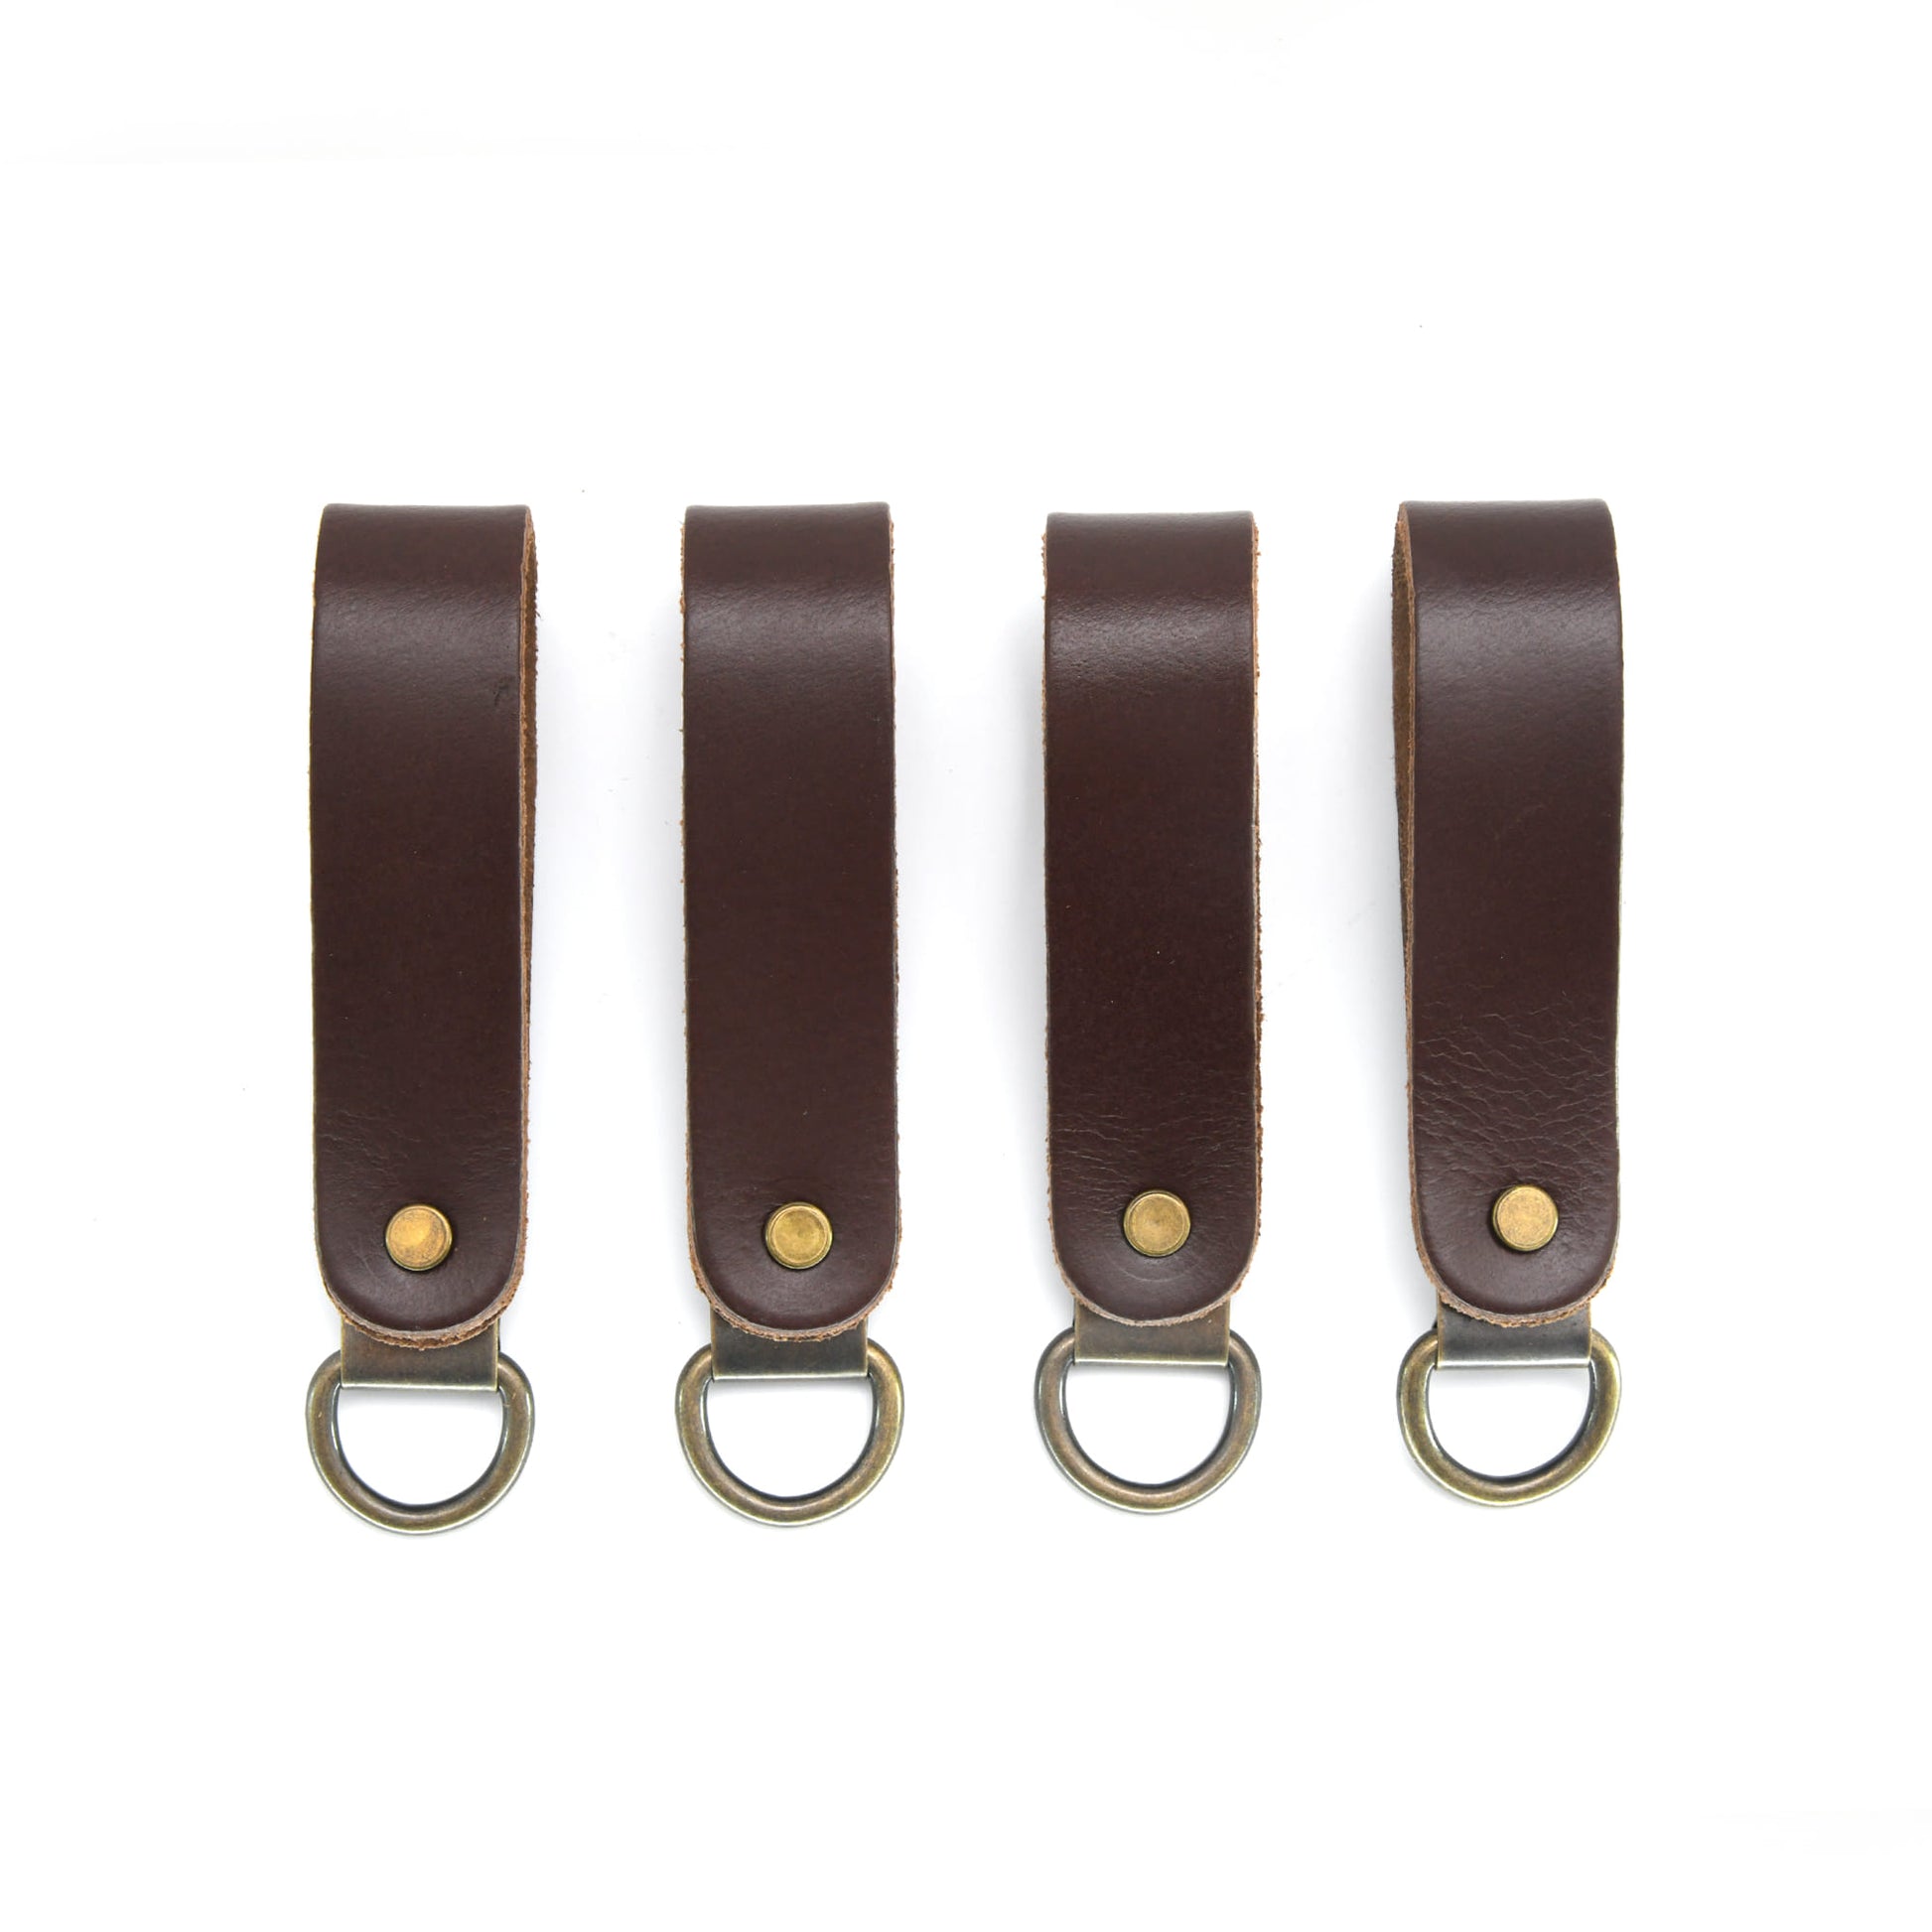 Style n Craft 98200 - Leather D-Ring Loop Set (4 Pcs) for Suspender Attachment in Dark Tan Color - Back View. Each Set Contains 4 Leather Loops attached to the D-ring with a metal plate